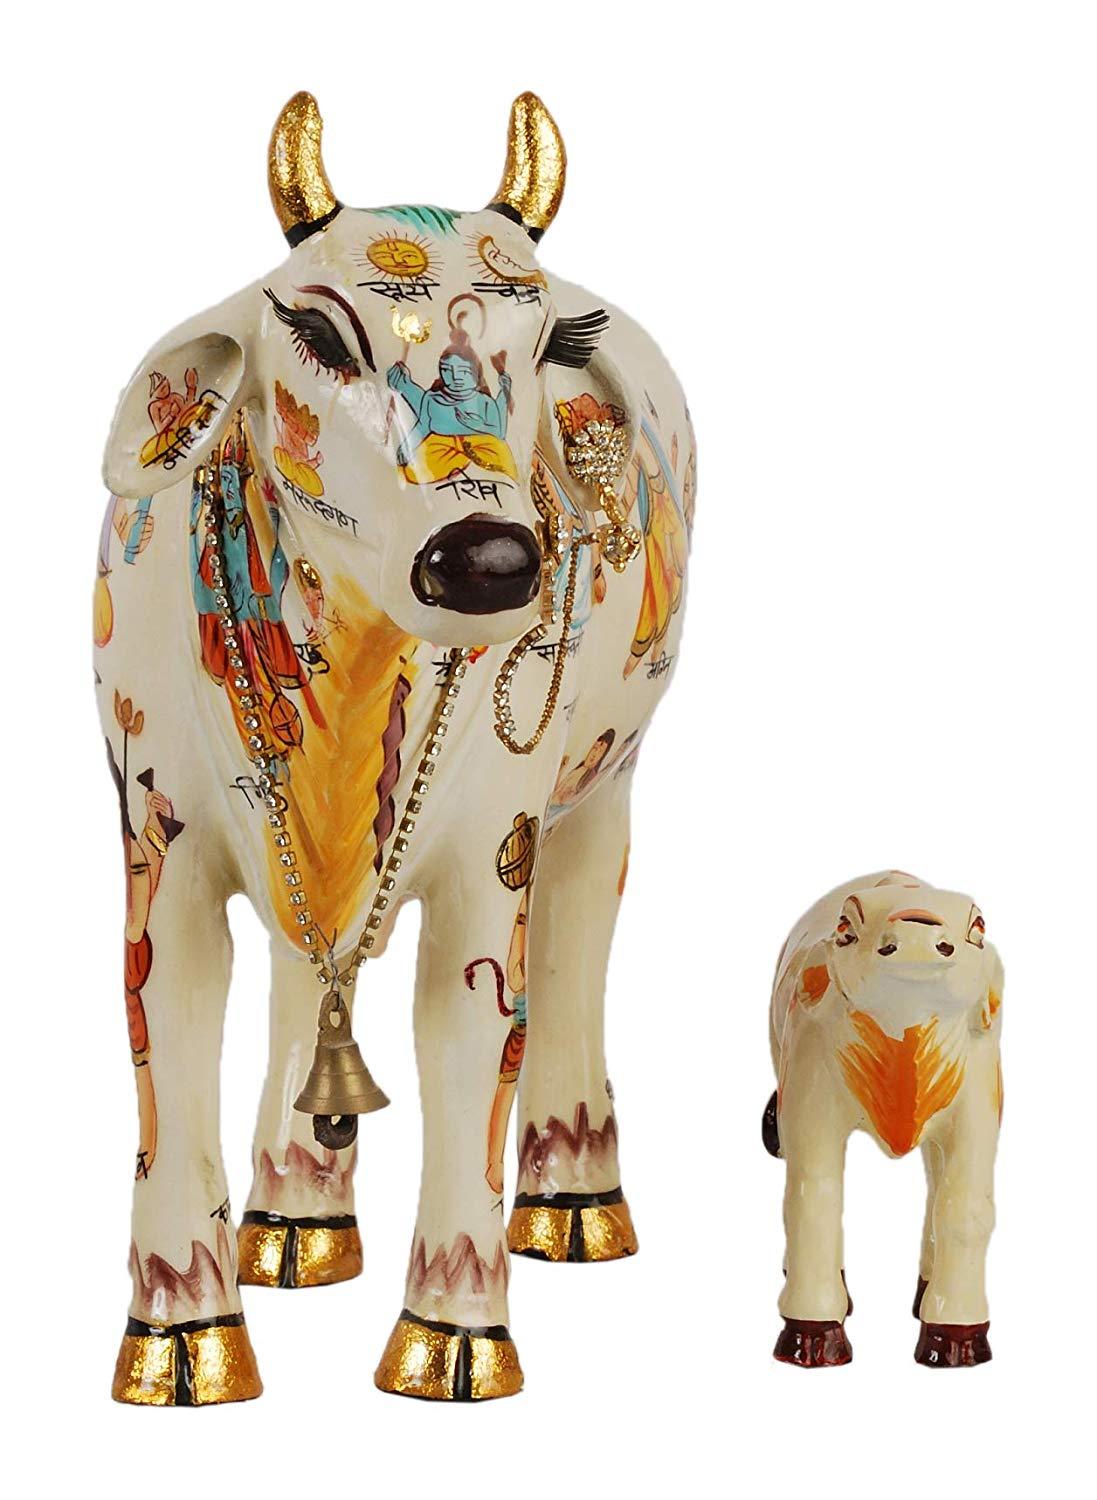 Kamdhenu Cow With Calf size 20 cm God Figure Hand Painted, Polyresin Statue Home Decor And Puja Article Showpiece - GreentouchCrafts